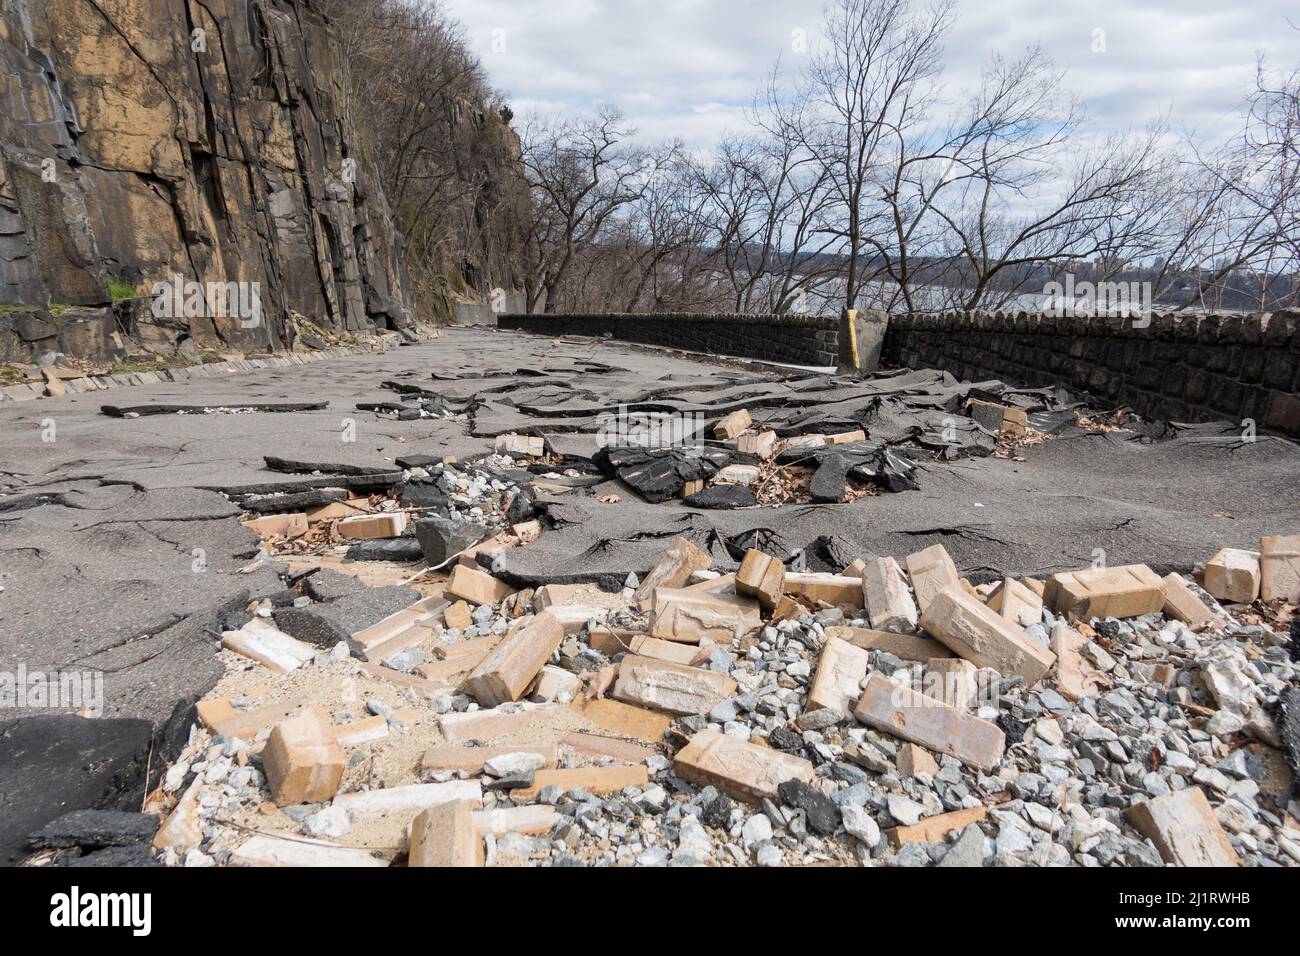 Aftermath of the hurricane, tropical storm Ida - damaged pavement on Dyckman Hill Road, Englewood Cliffs entrance to the Palisades Interstate Park, NJ Stock Photo